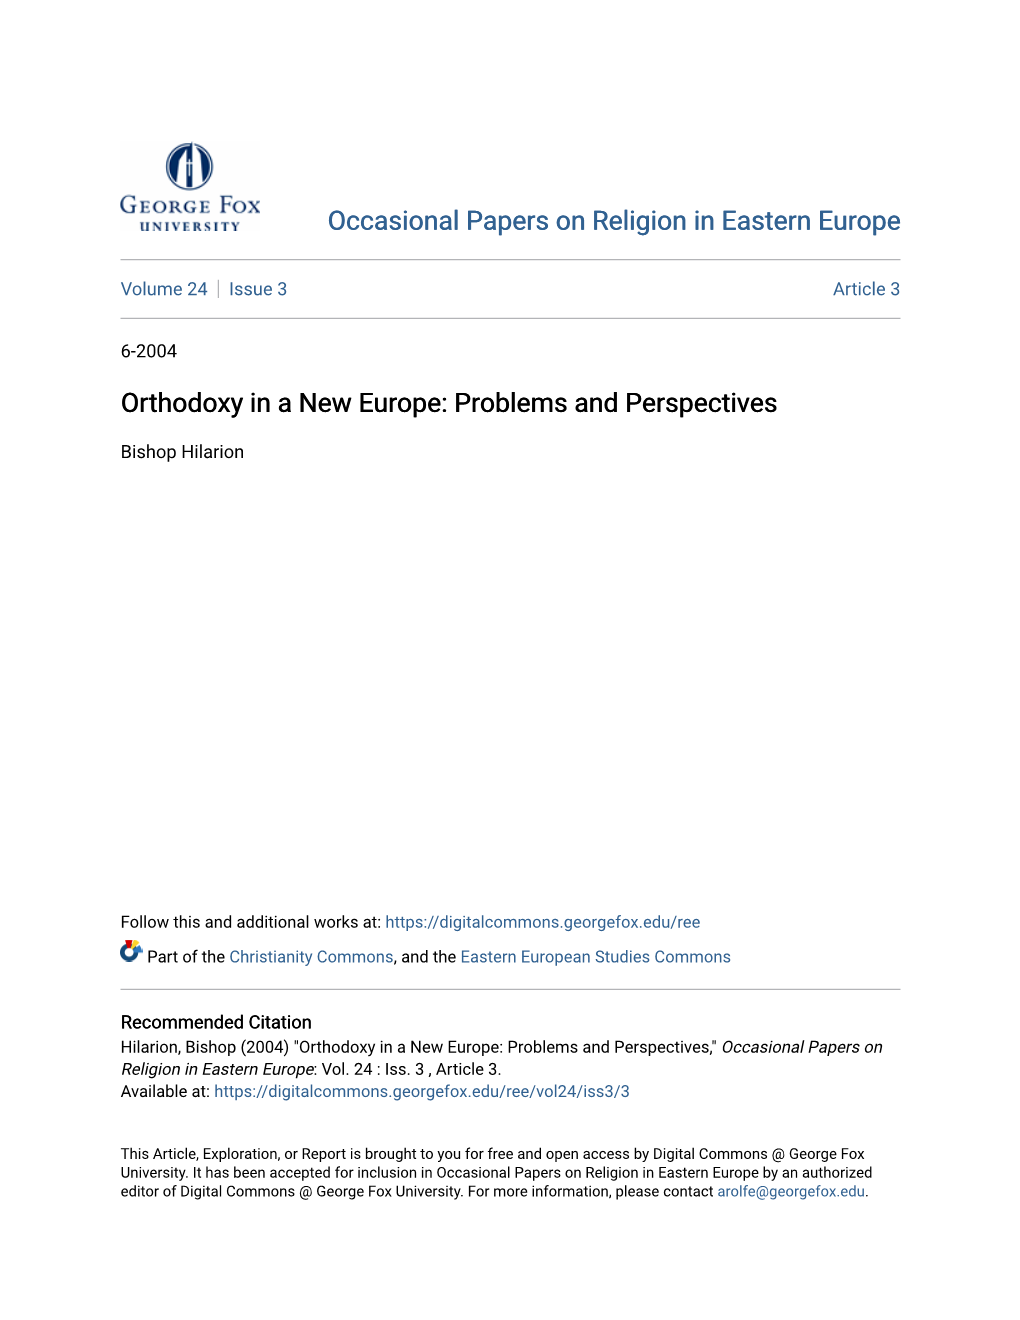 Orthodoxy in a New Europe: Problems and Perspectives